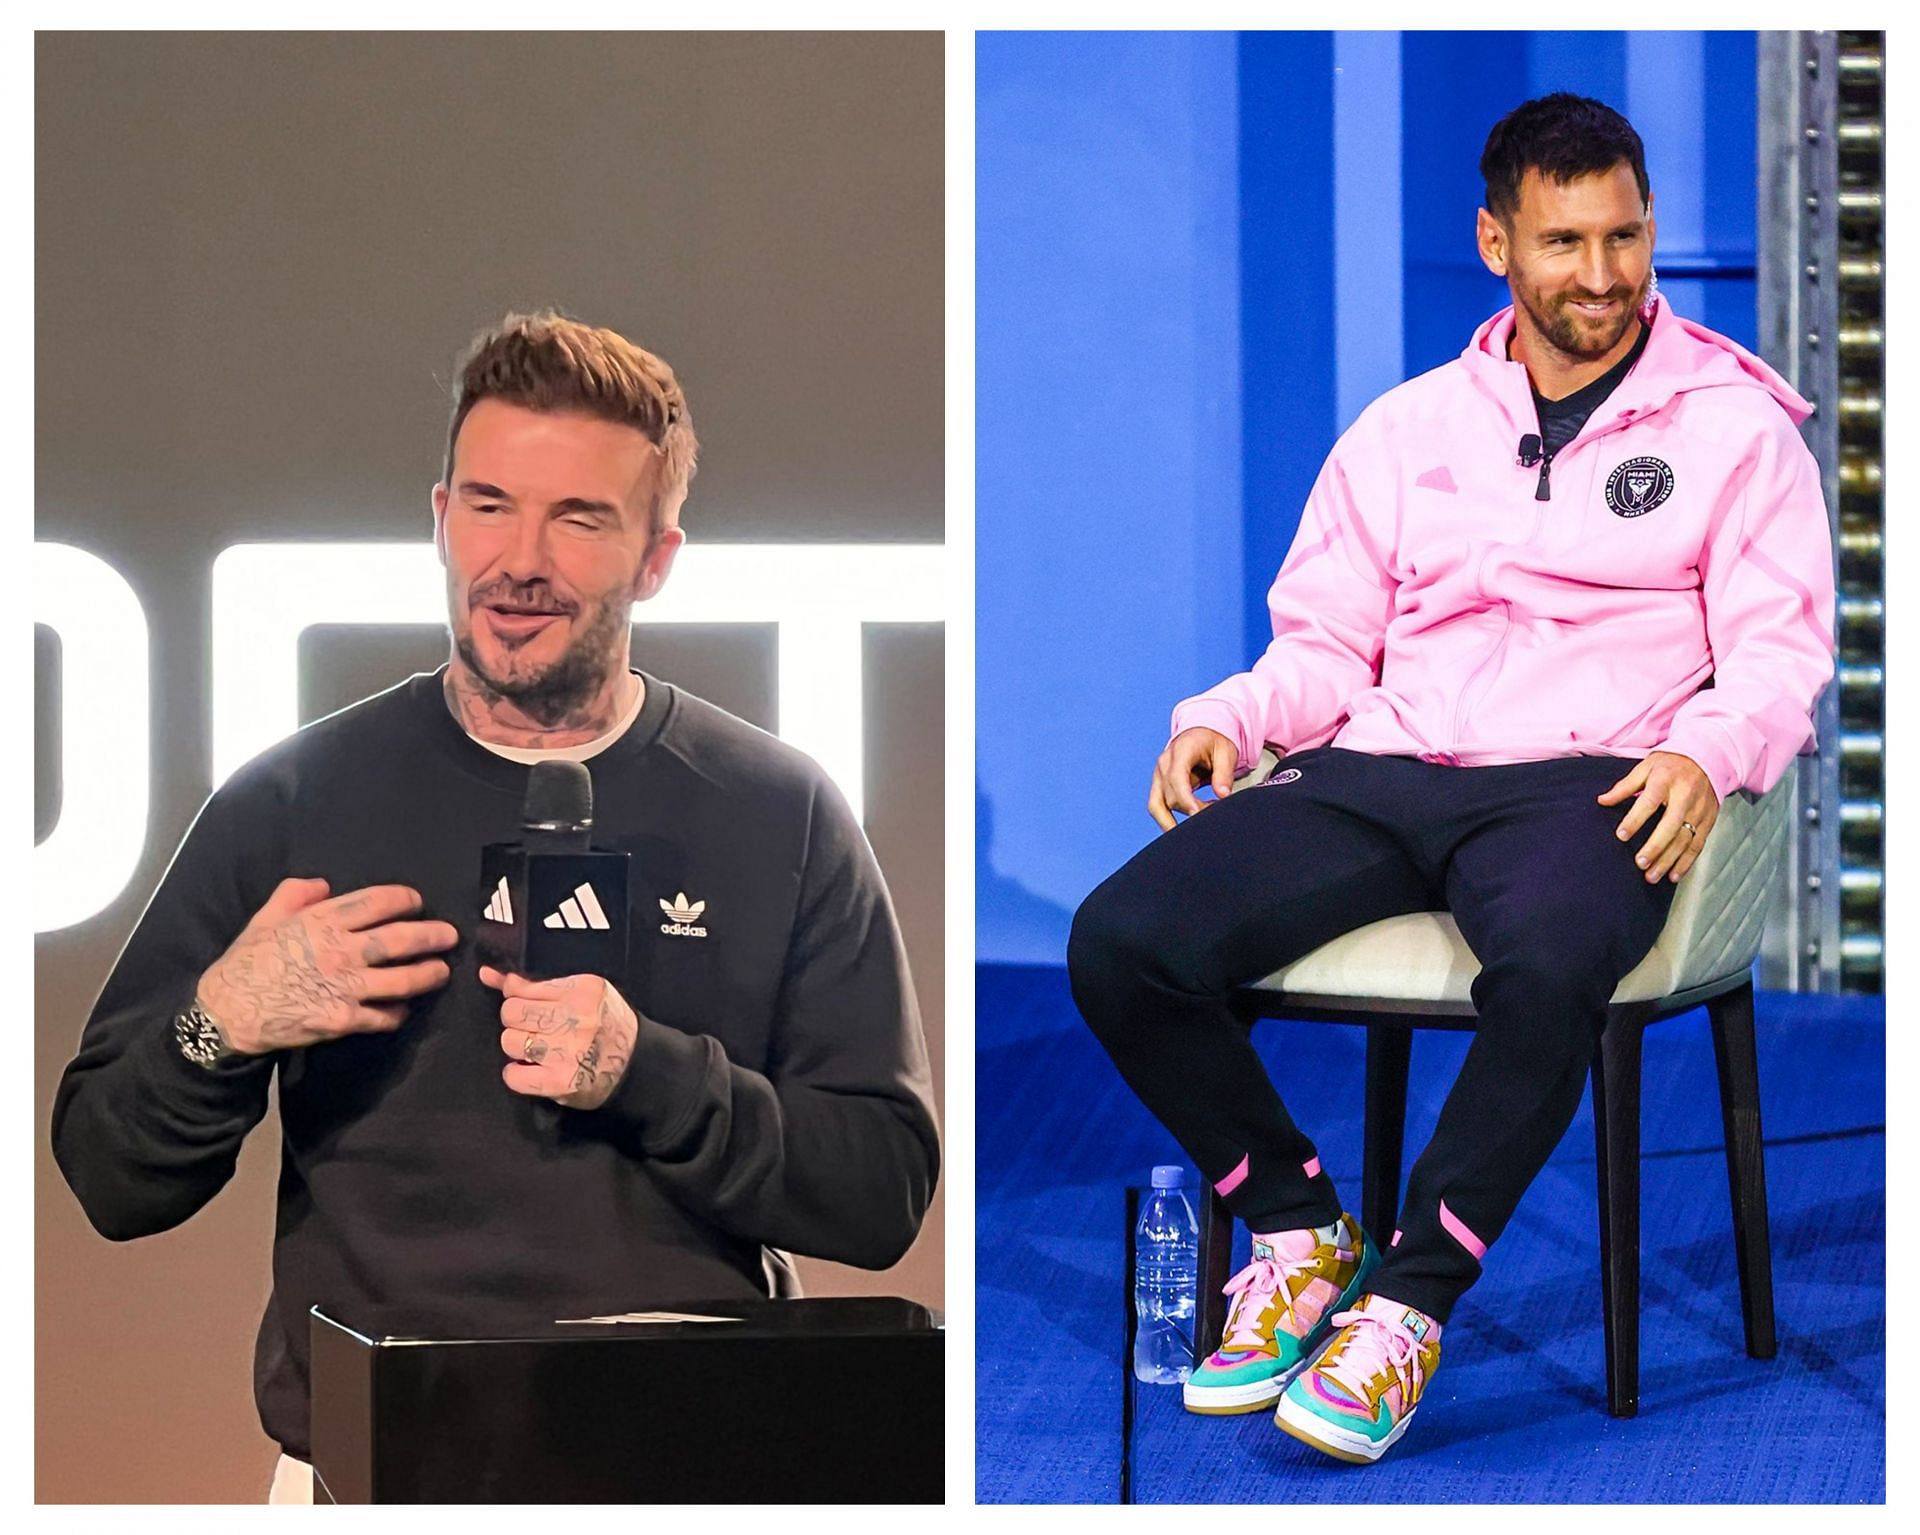 Super Bowl 2024 commercials: 5 high-profile celebs who will feature this year feat. Lionel Messi and David Beckham